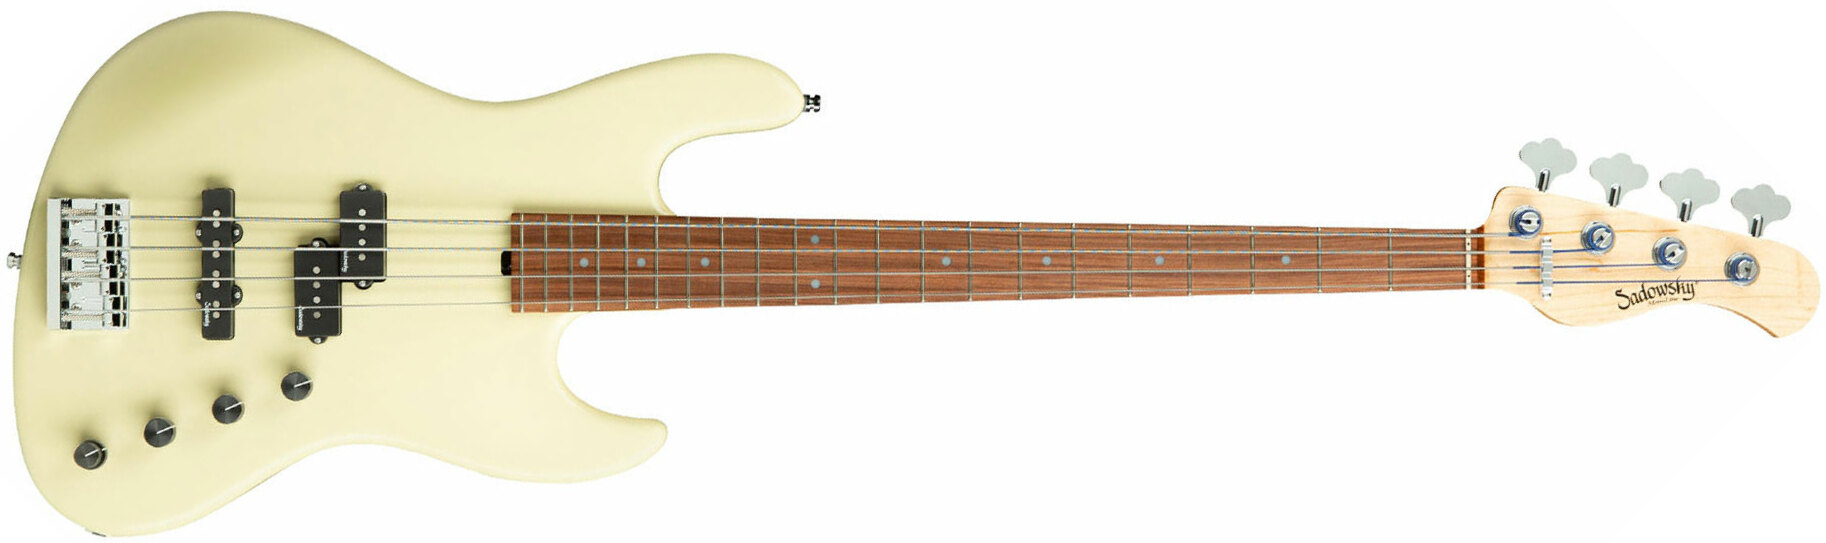 Sadowsky Verdine White 21 Fret 4c Metroline Signature All Active Pf - Olympic White - Solid body electric bass - Main picture